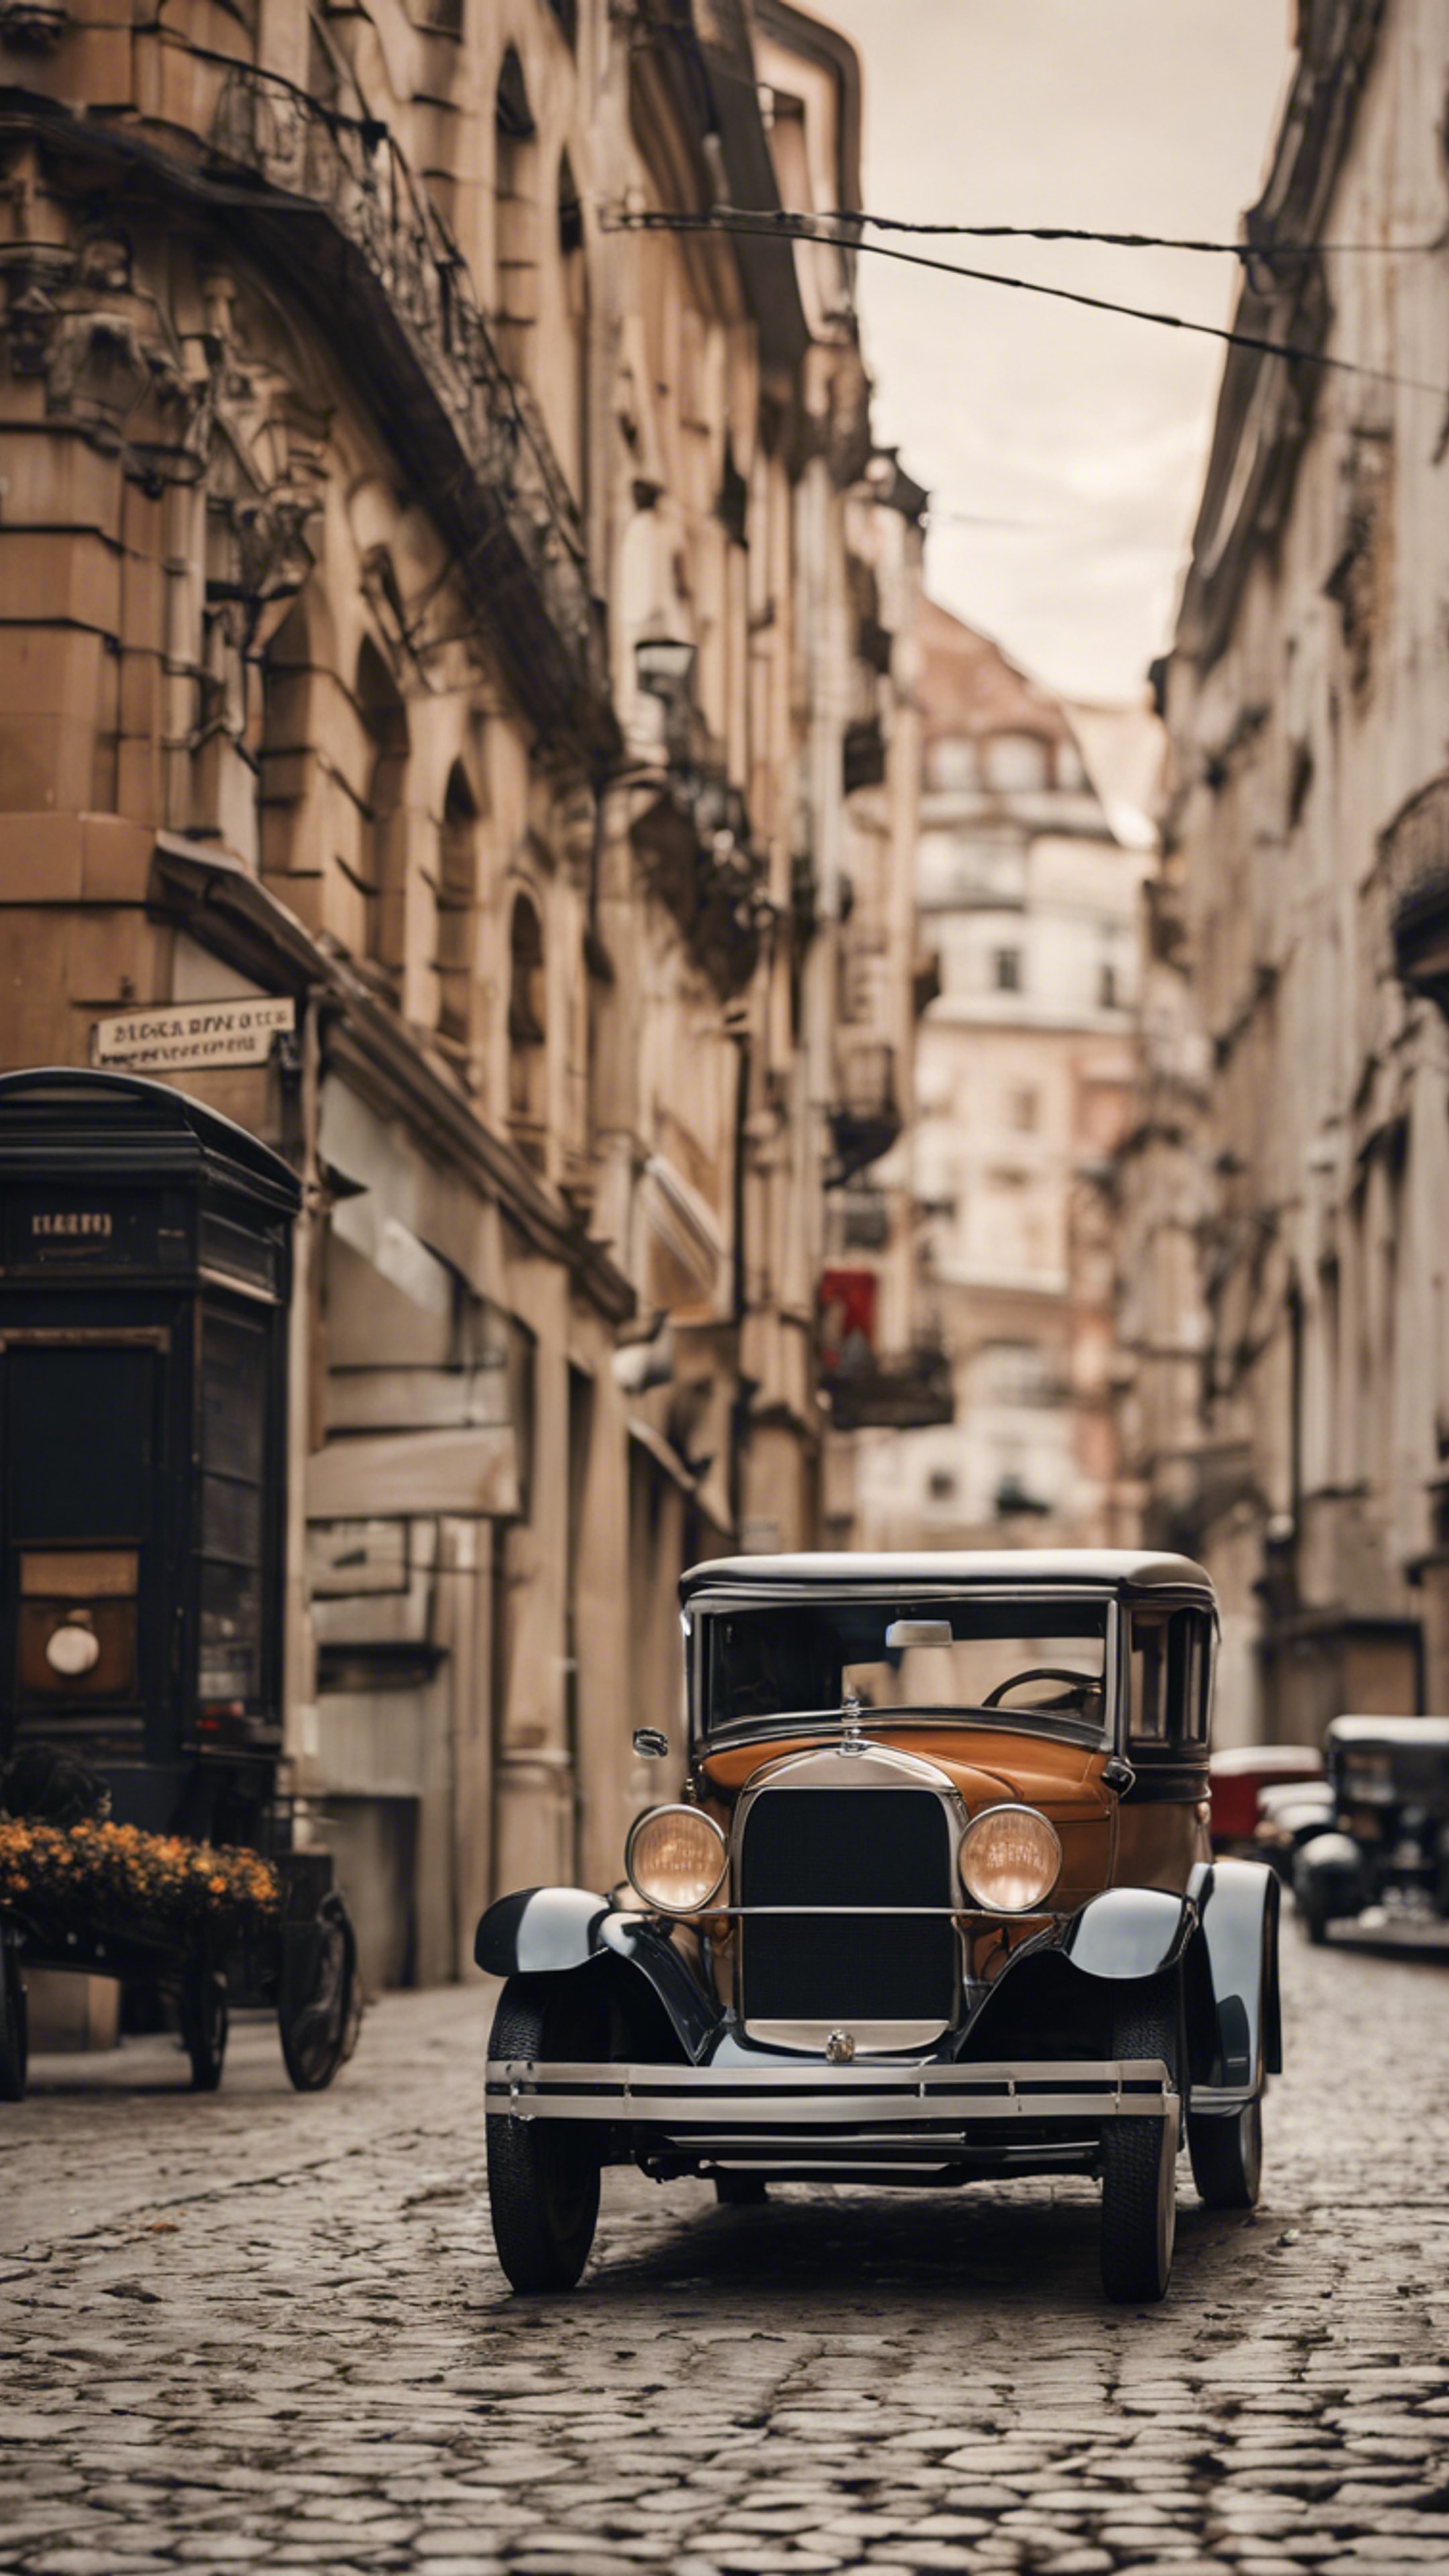 A nostalgic cityscape in the 1920s with classic cars and cobblestone streets. Tapet[d252acda6f644acf85b4]